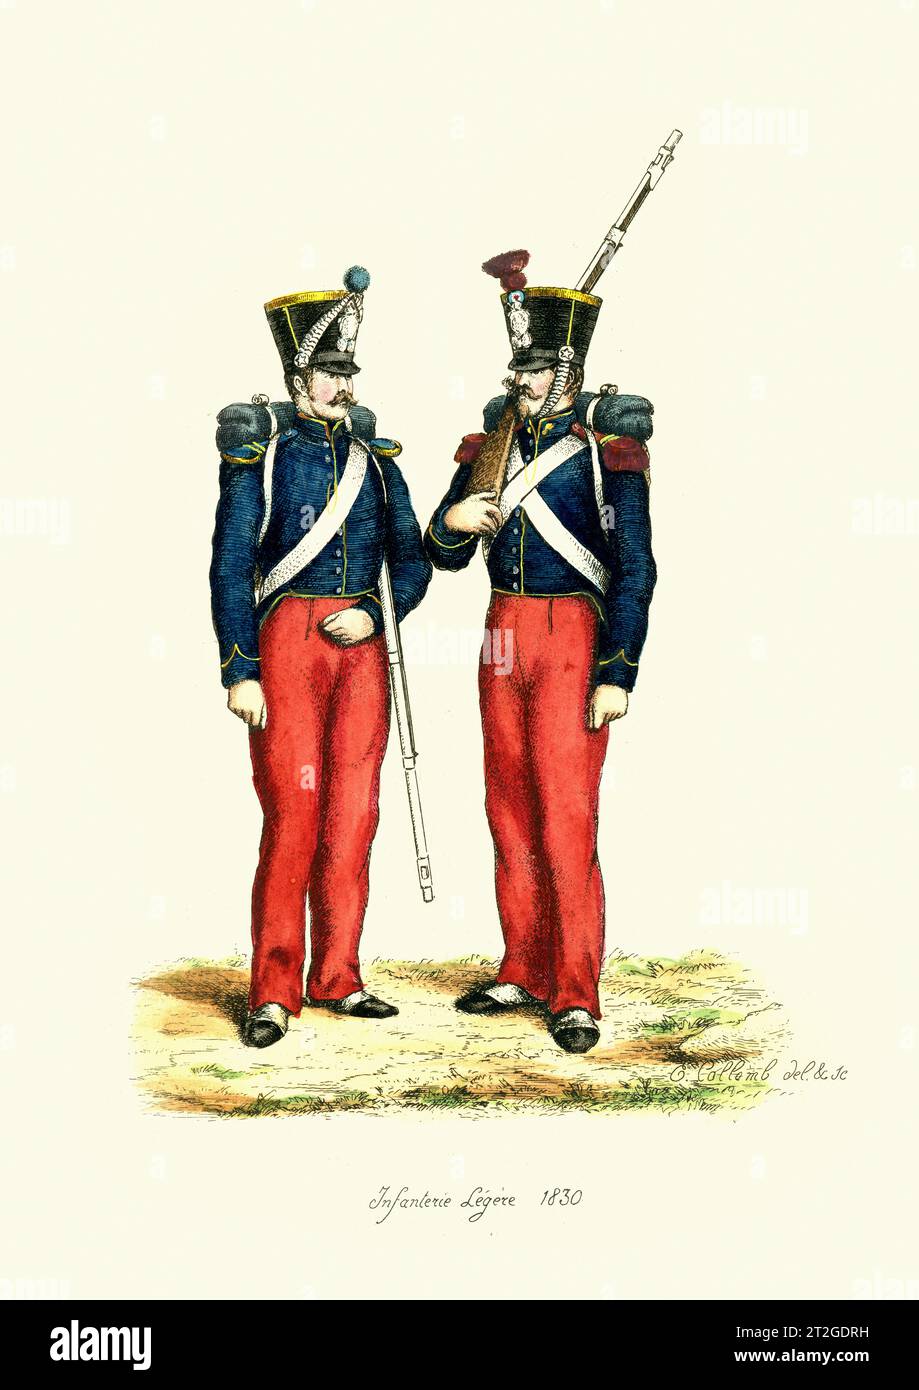 French Military Uniforms, 19th Century, History, Infantry soliders, 1830, Infanterie Ligere Stock Photo